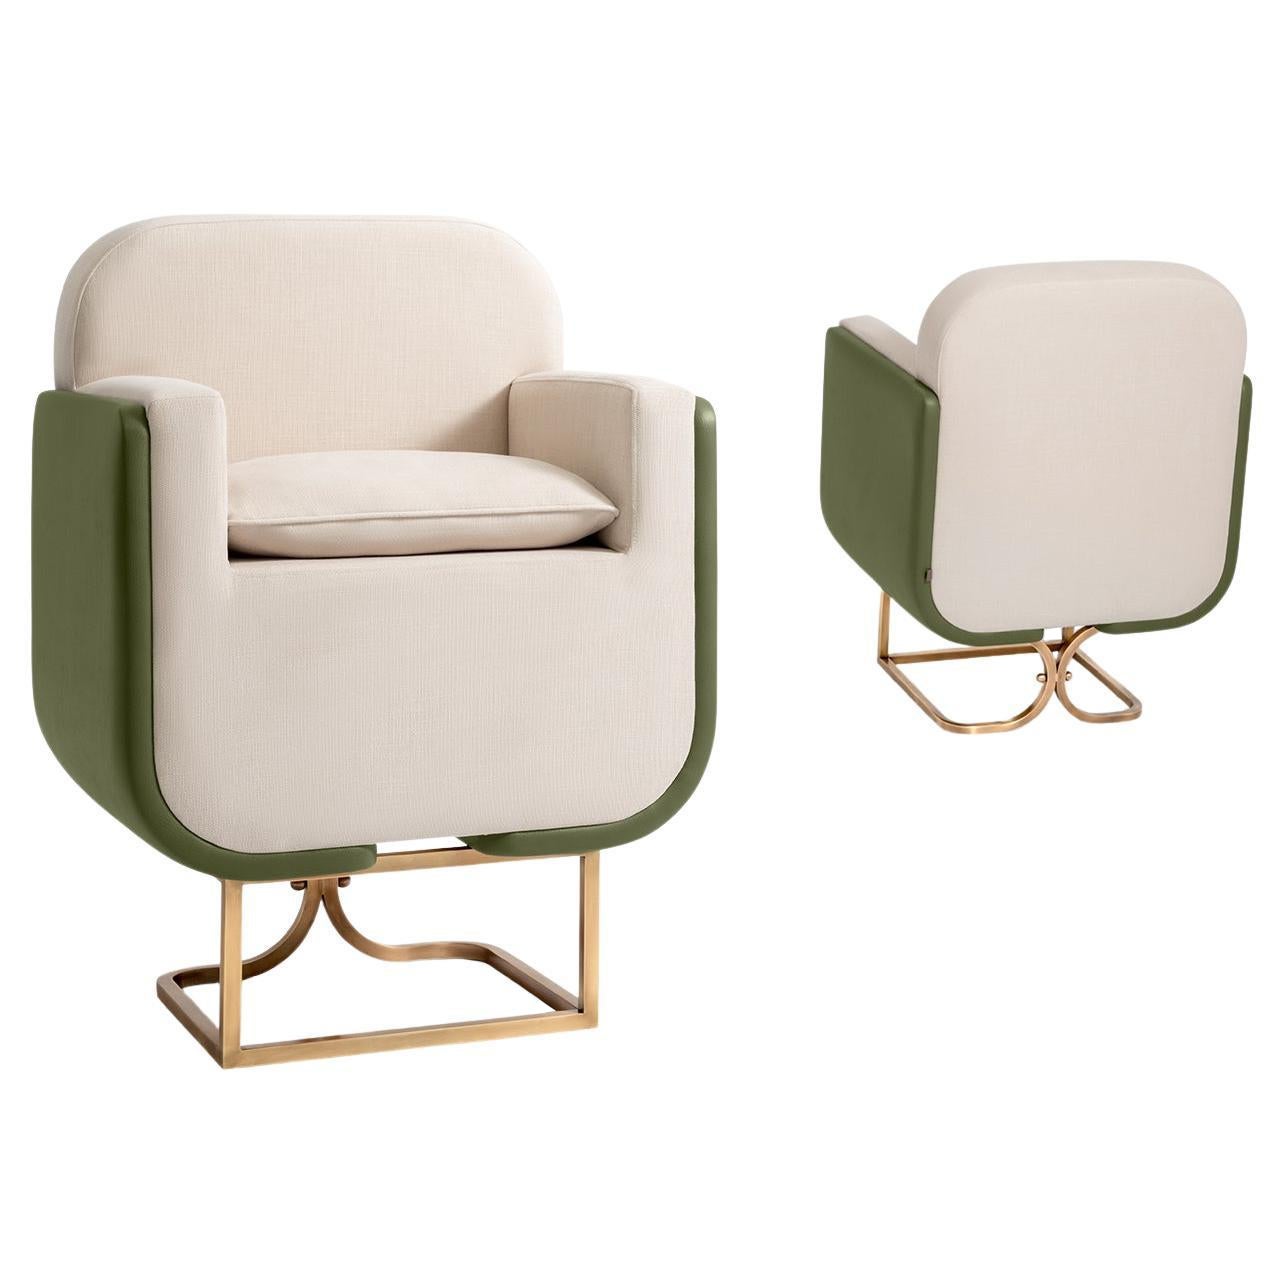 Up Green Brass &Fux Leather Chair For Sale